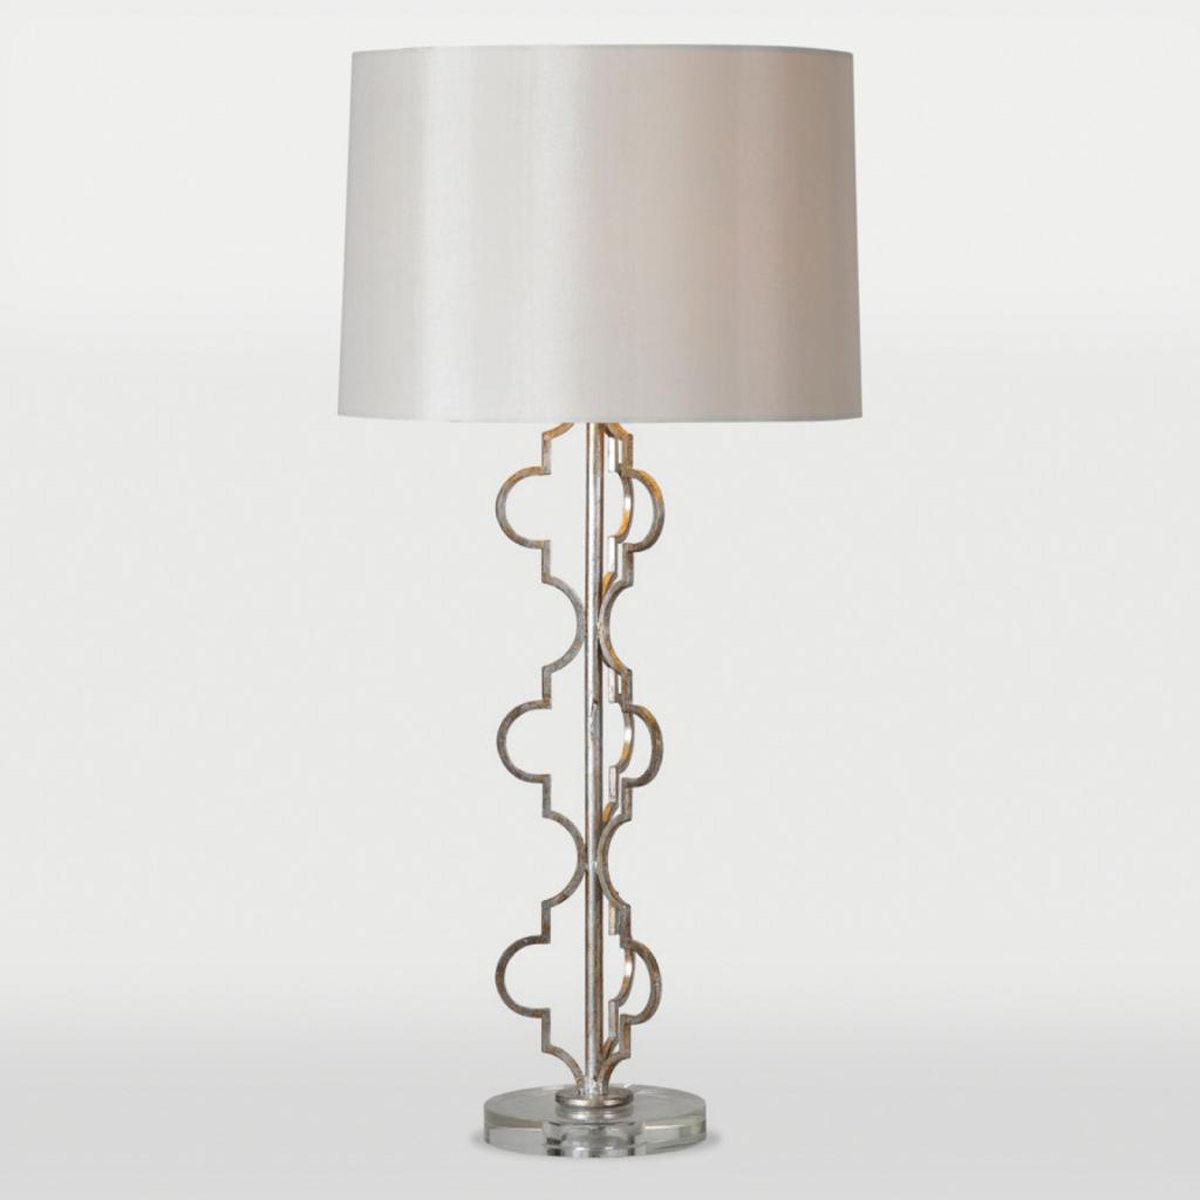 Ren-Wil Dynasty Table Lamp - Silver Leaf